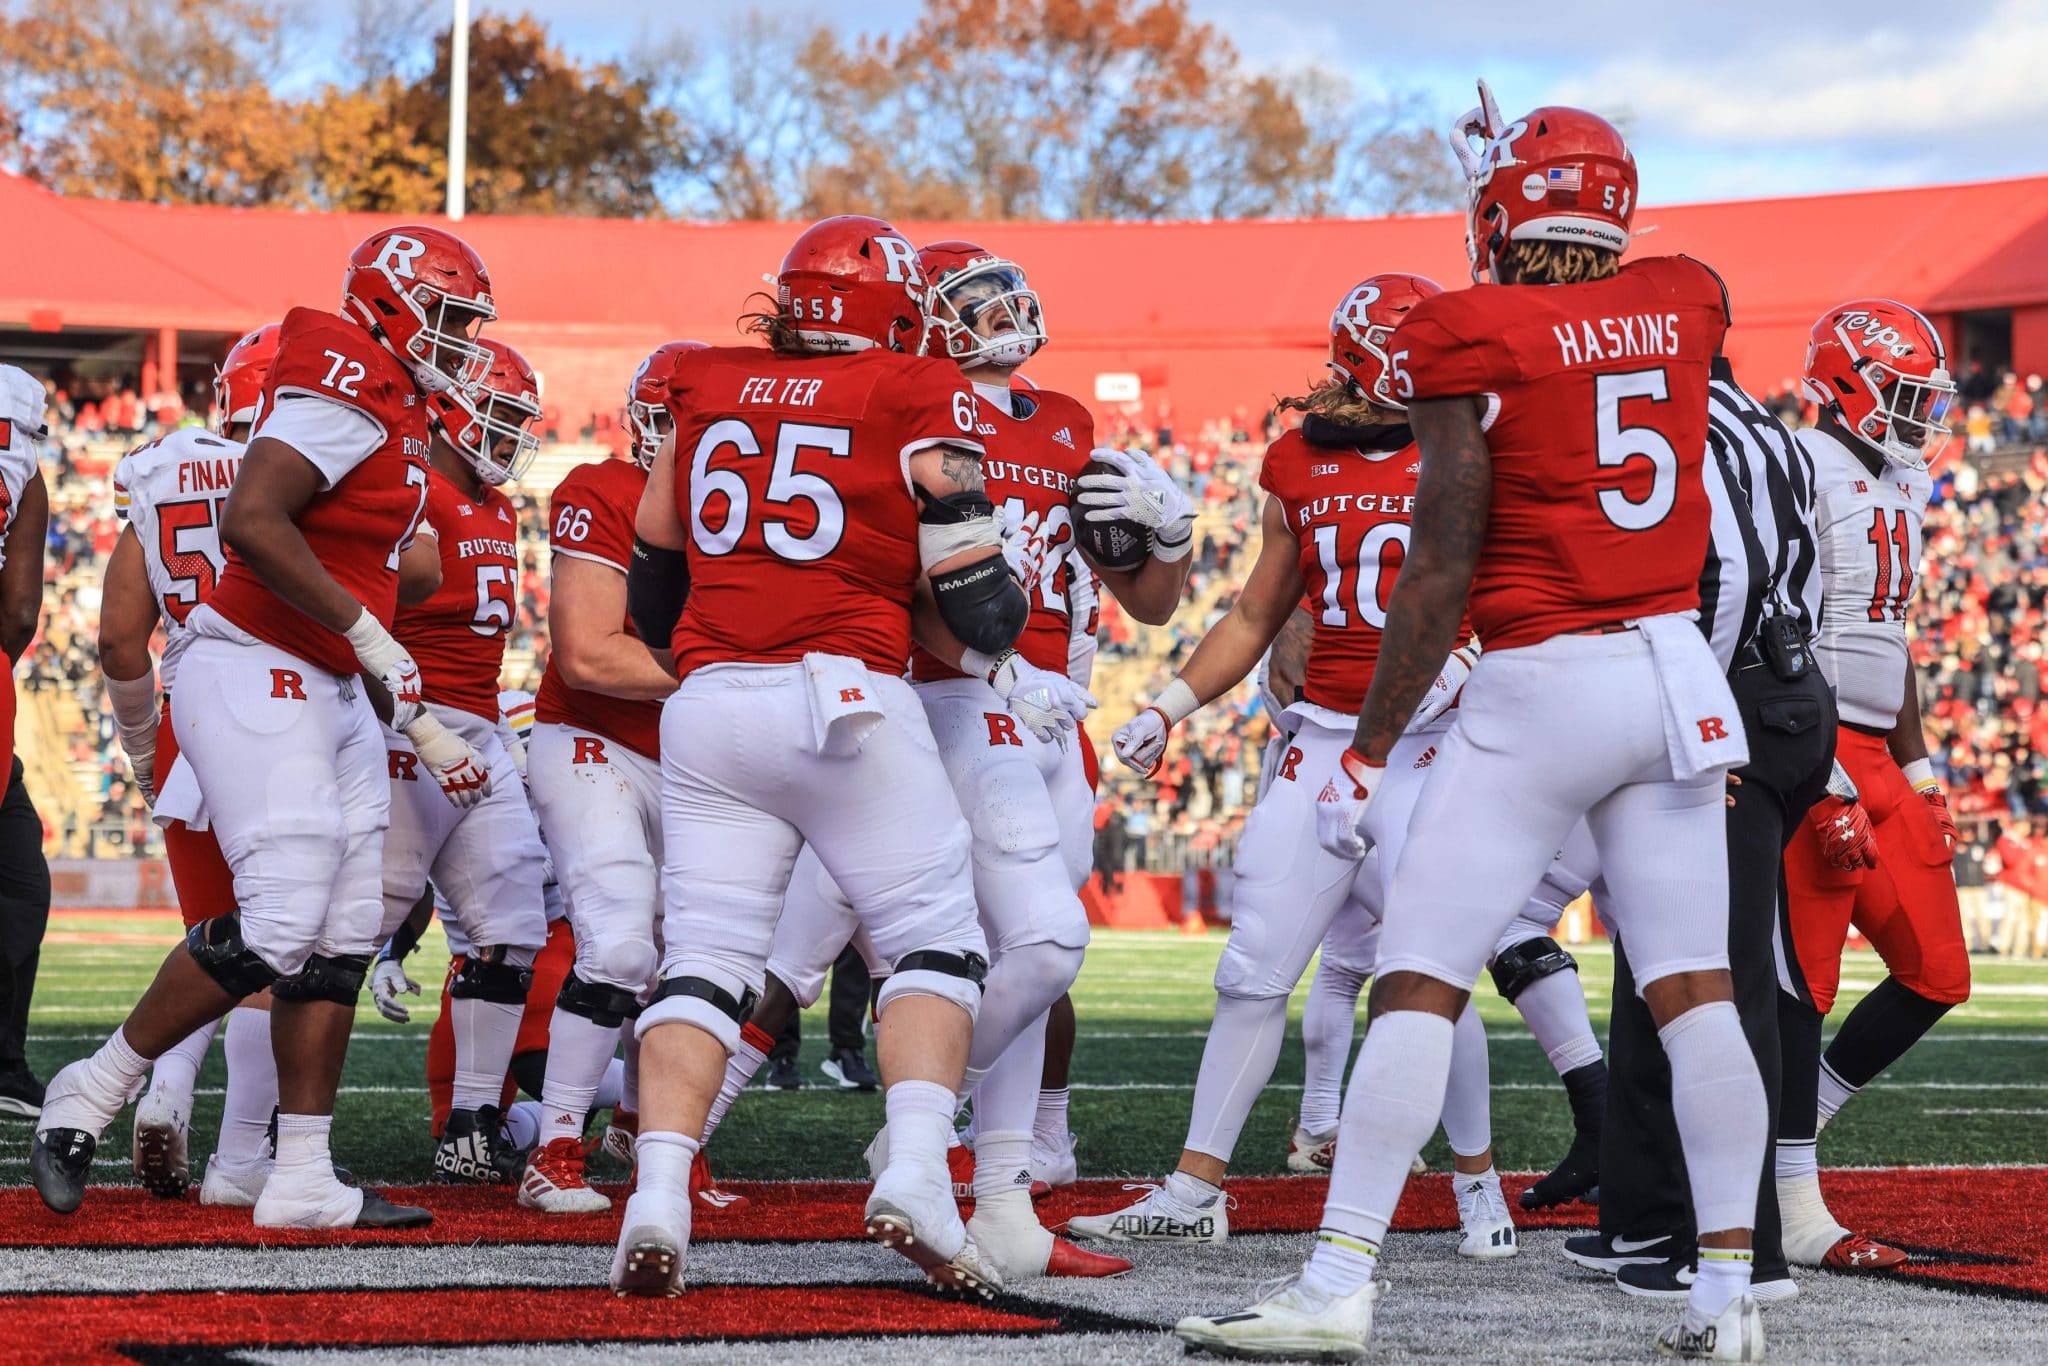 Your 5-7 Rutgers Scarlet Knights are BOWL BOUND Baby